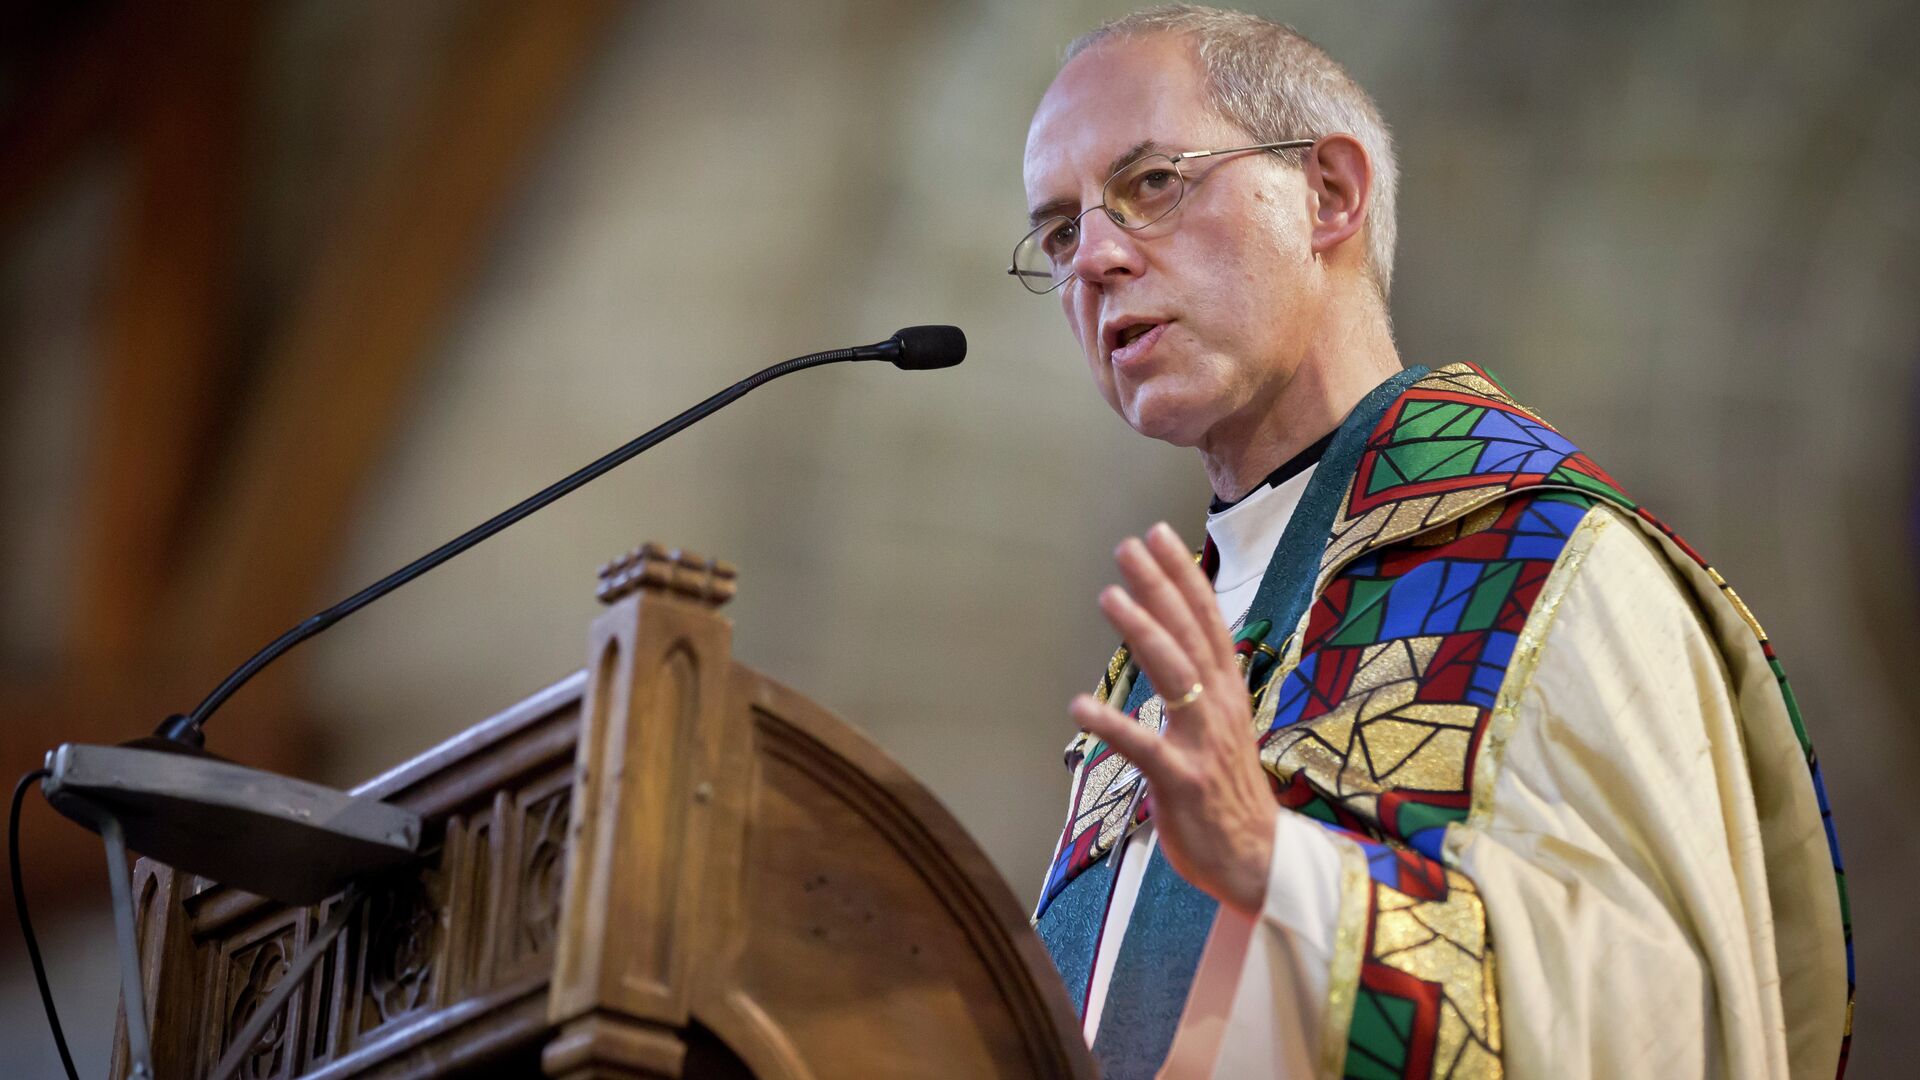 The Archbishop of Canterbury Justin Welby conducts a service at the All Saints Cathedral in Nairobi, Kenya Sunday, Oct. 20, 2013 - Sputnik International, 1920, 06.03.2021